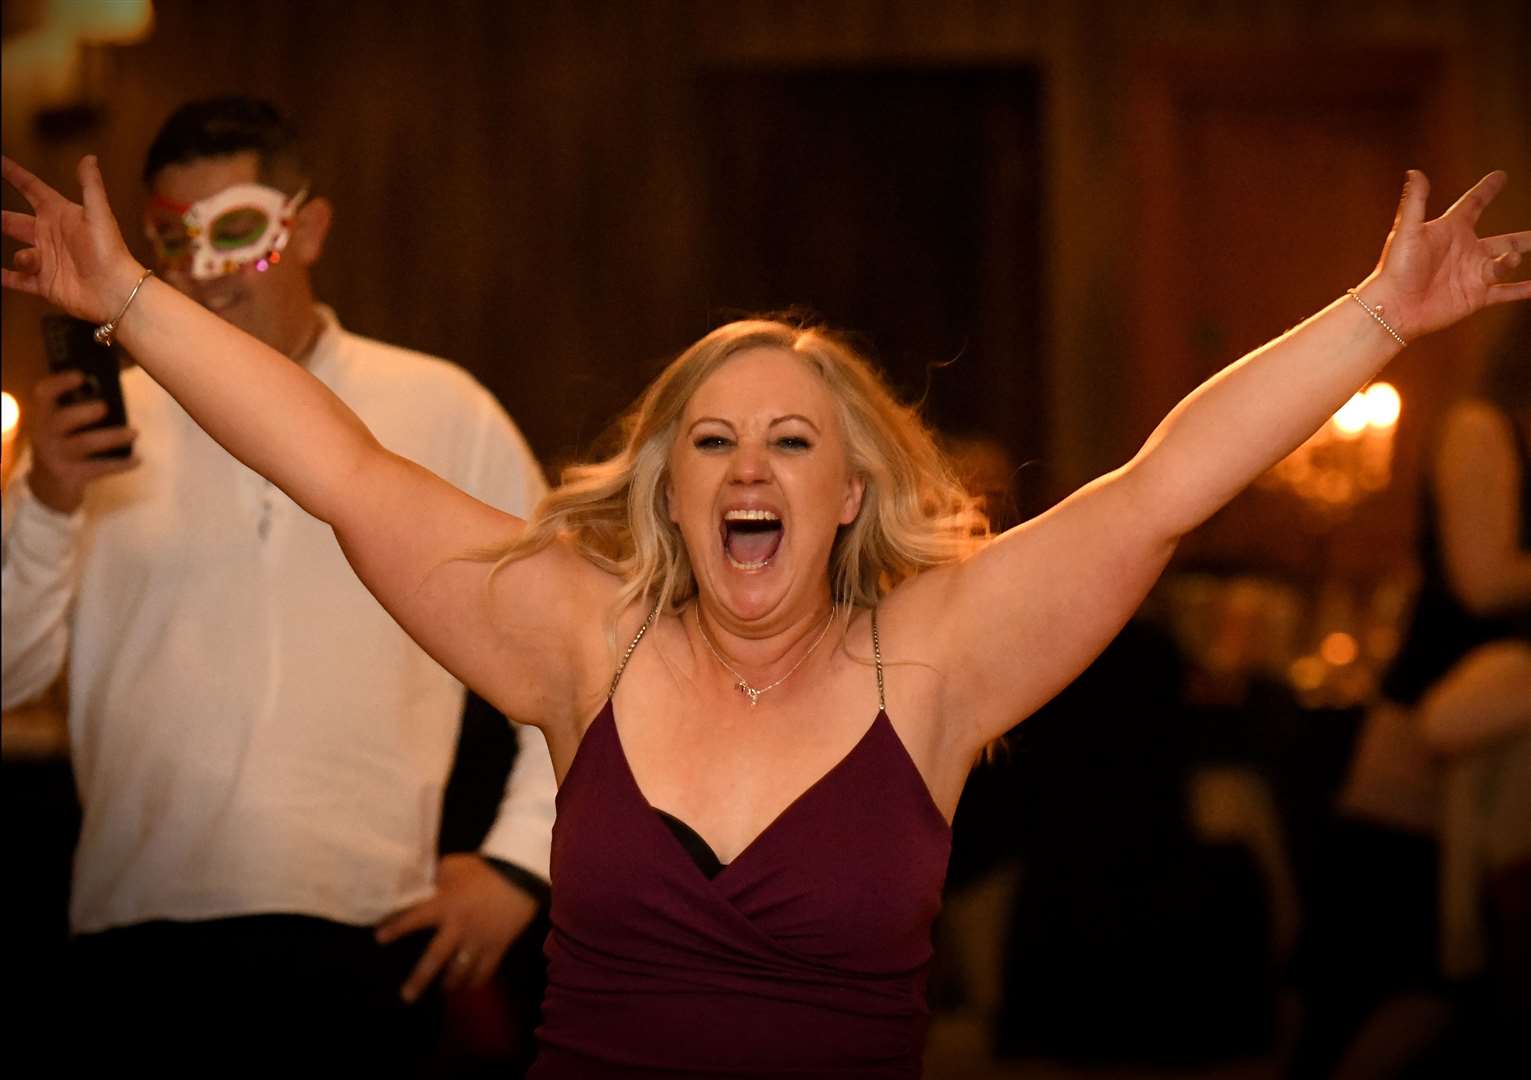 One Inverness woman enjoying the music at the ball.